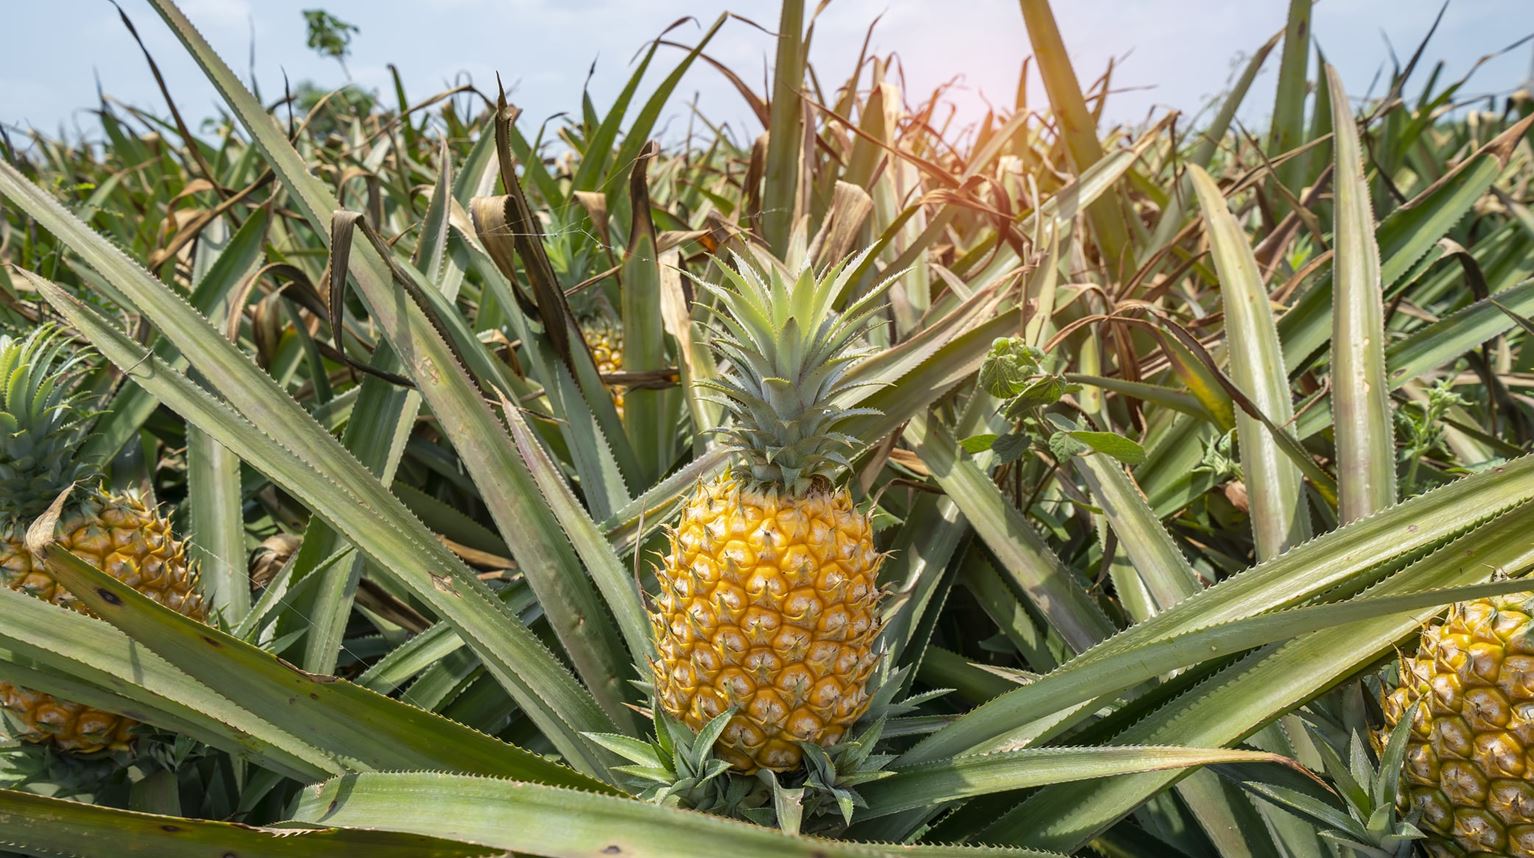 Pineapple field with a bright pineapple closeup.  